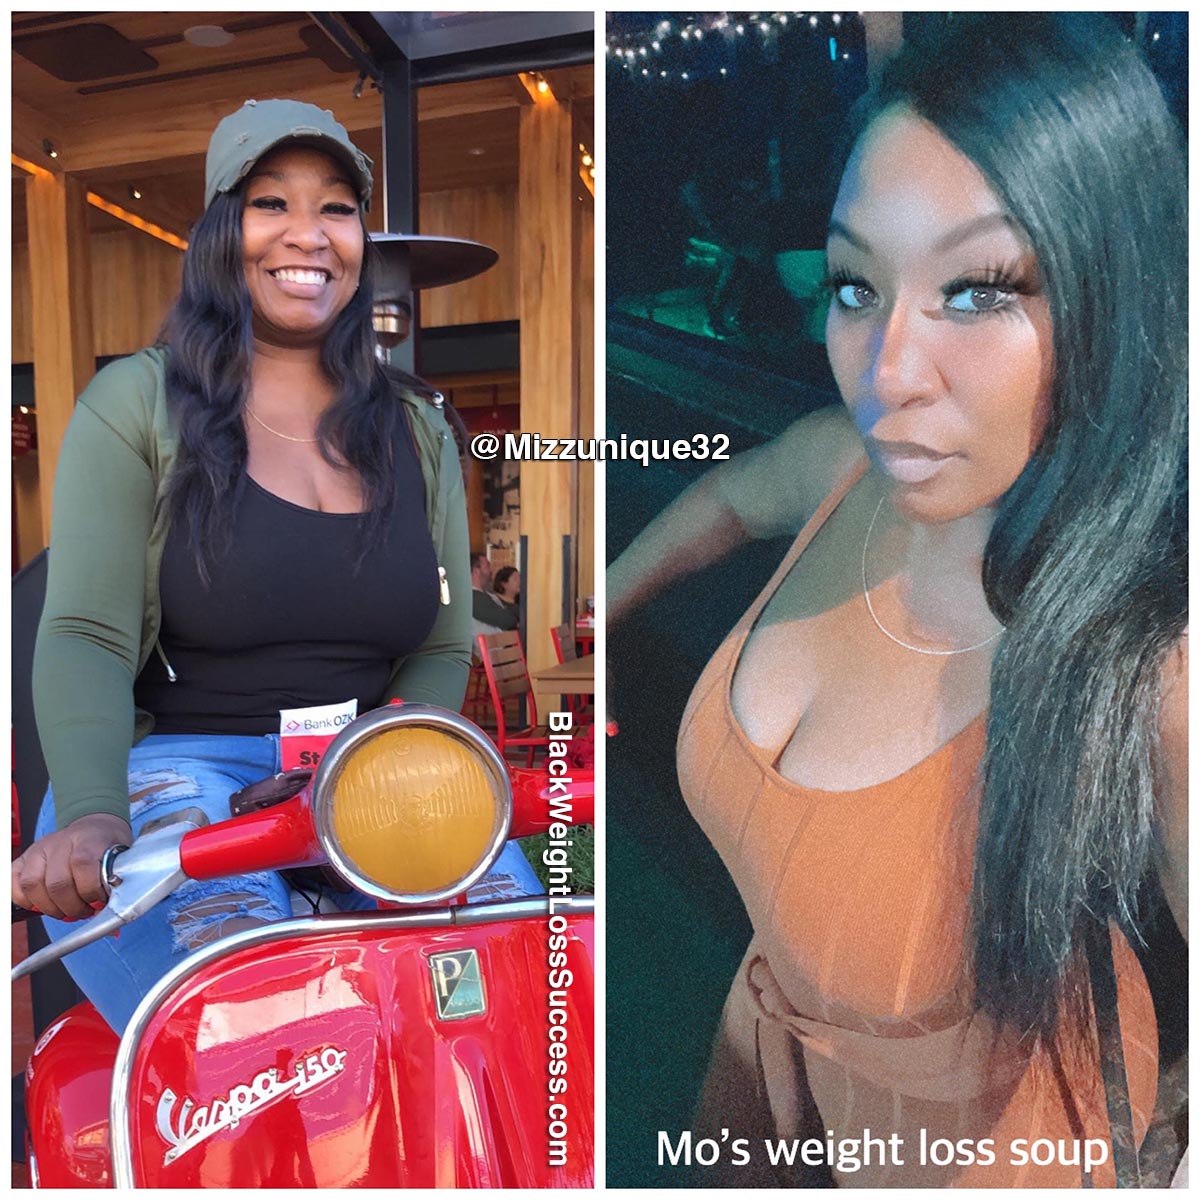 Monique before and after weight loss